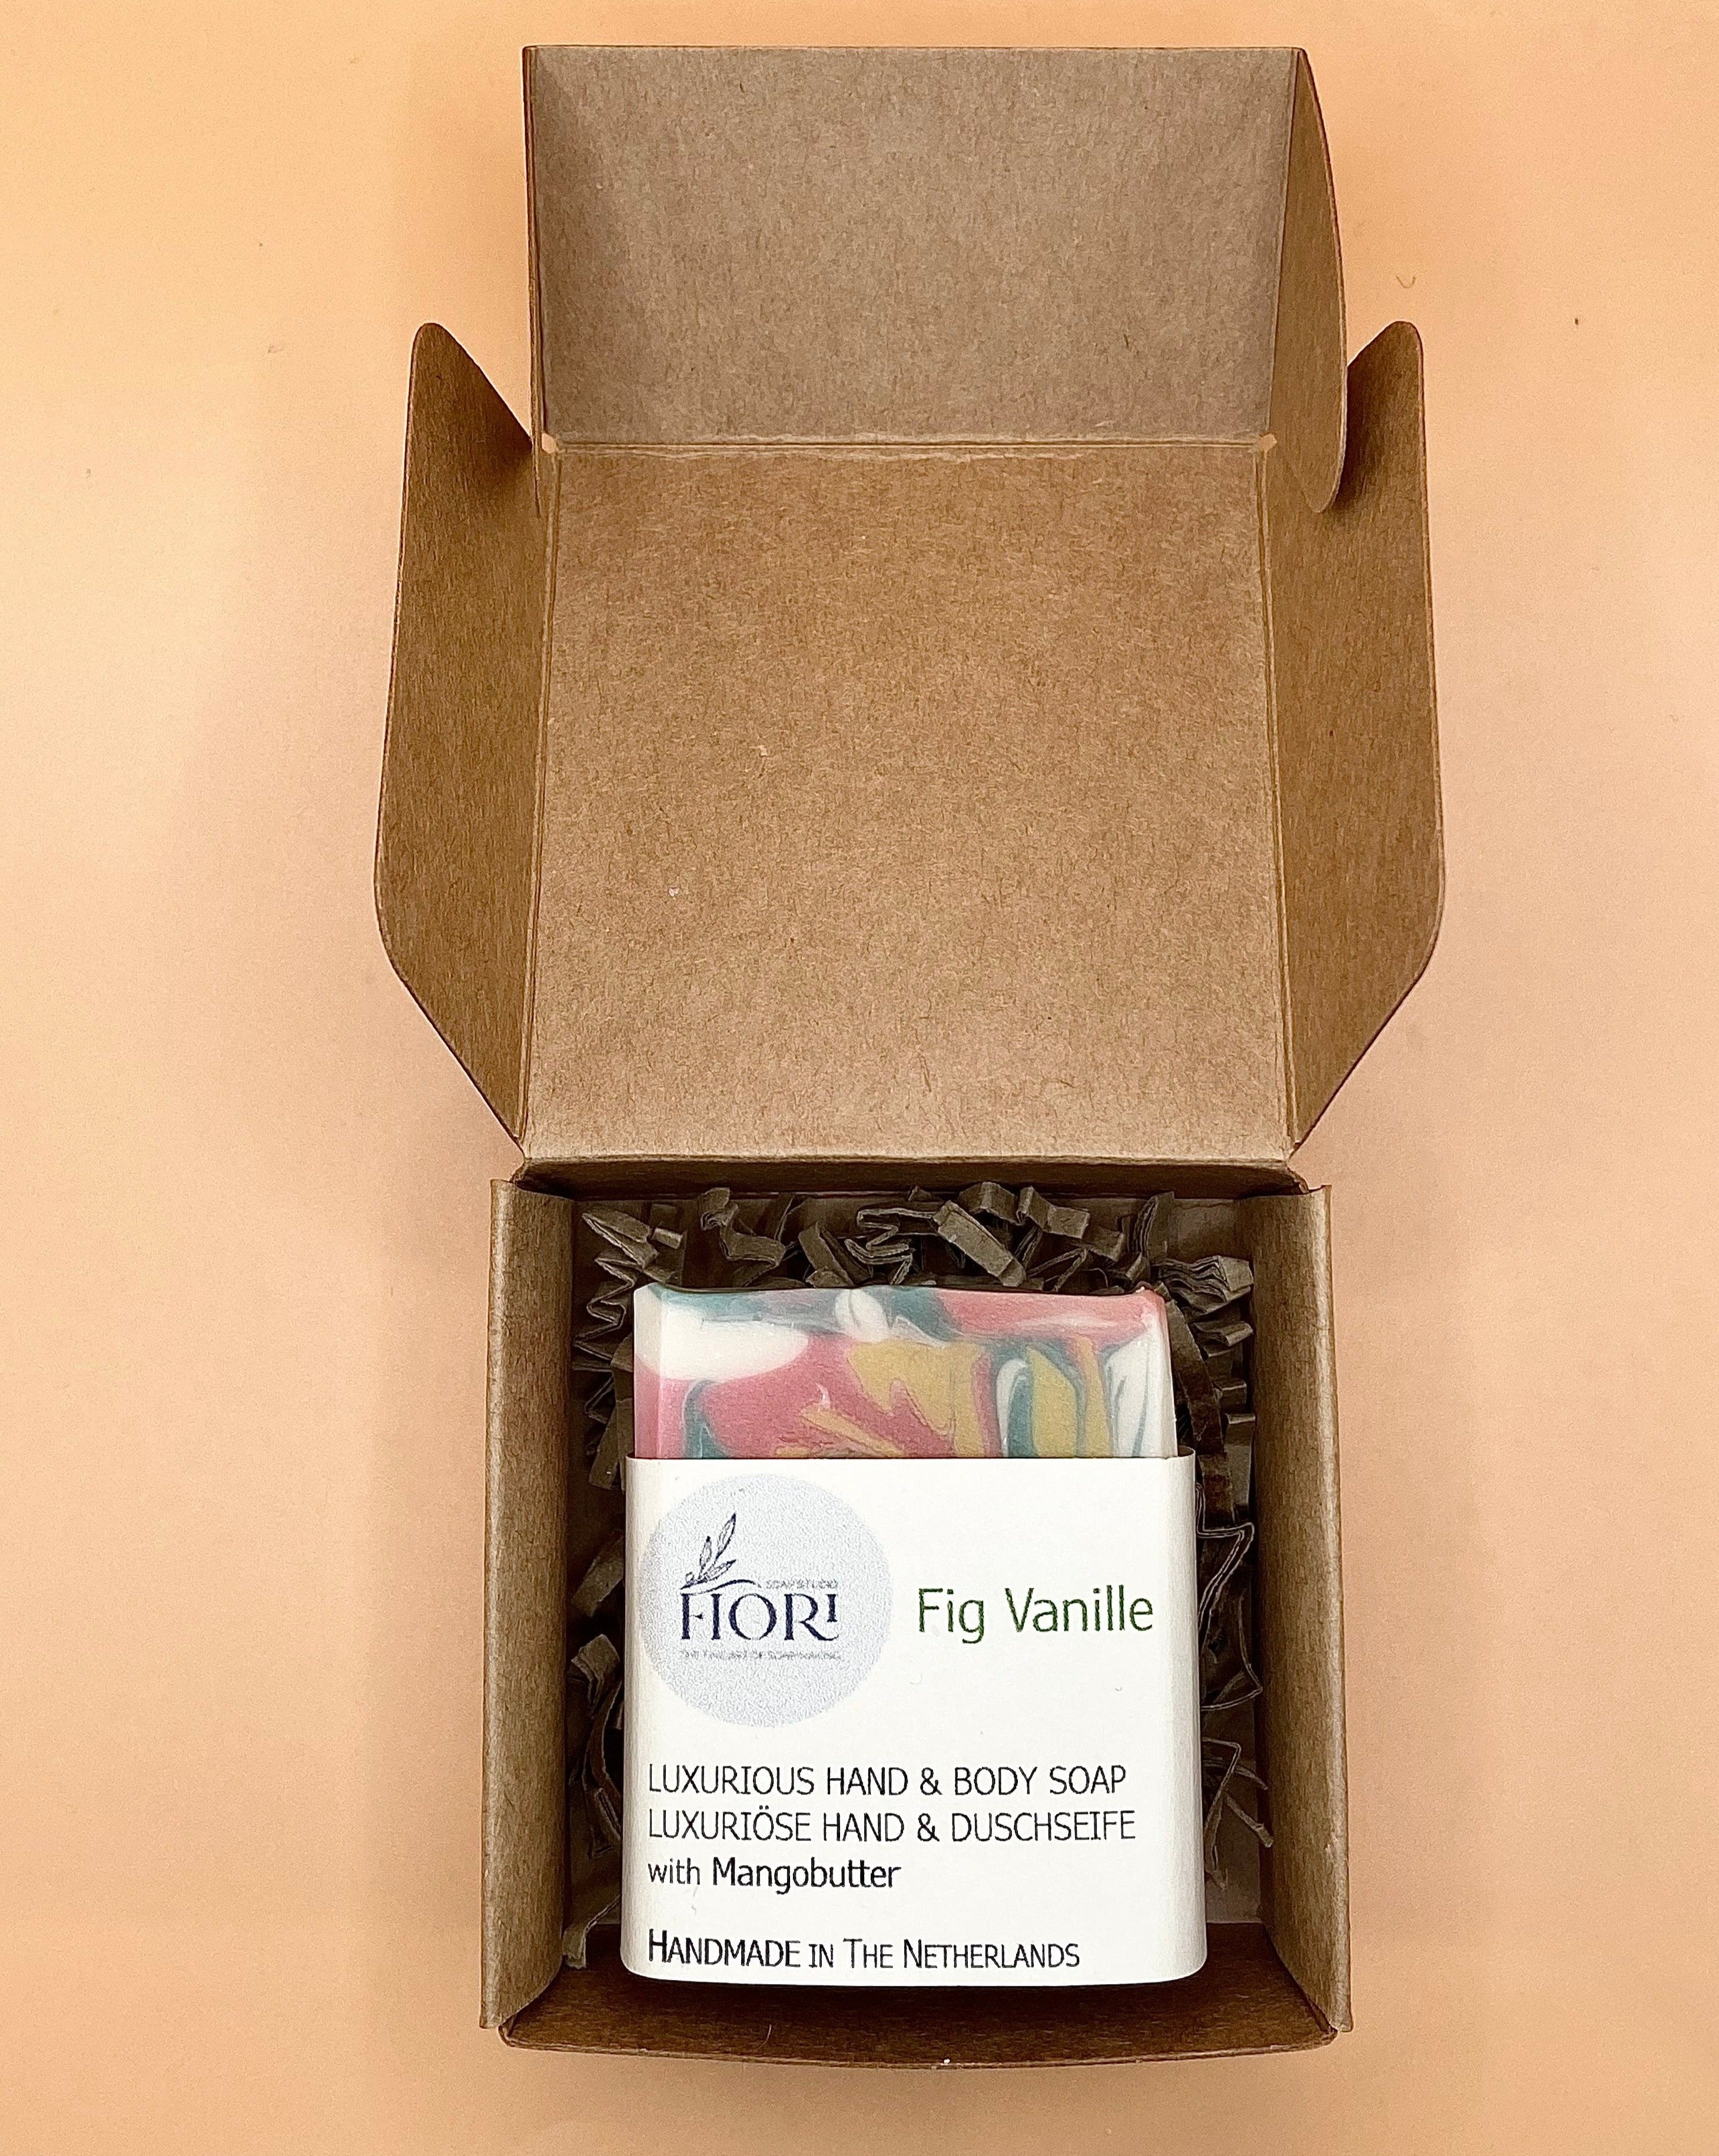 Fig-Vanille Soap packaged in Karton box